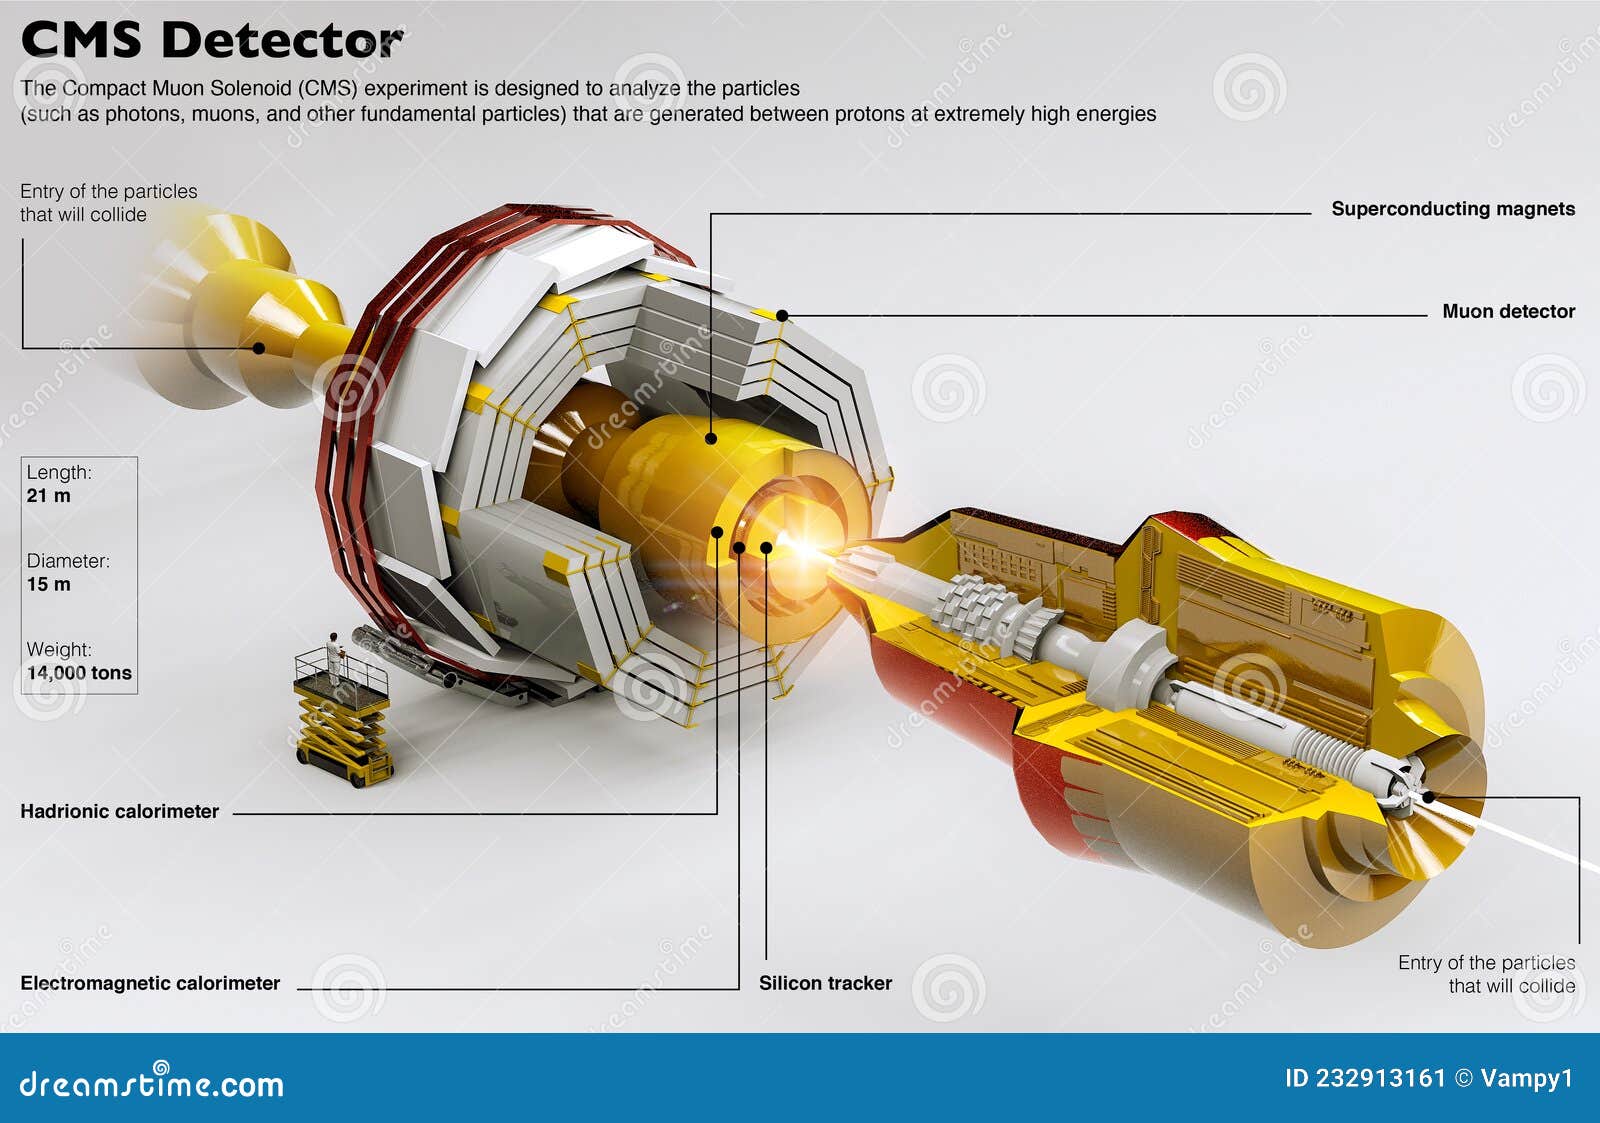 cms detector. compact muon solenoid. it is a particle physics detectors built on the large hadron collider. cern